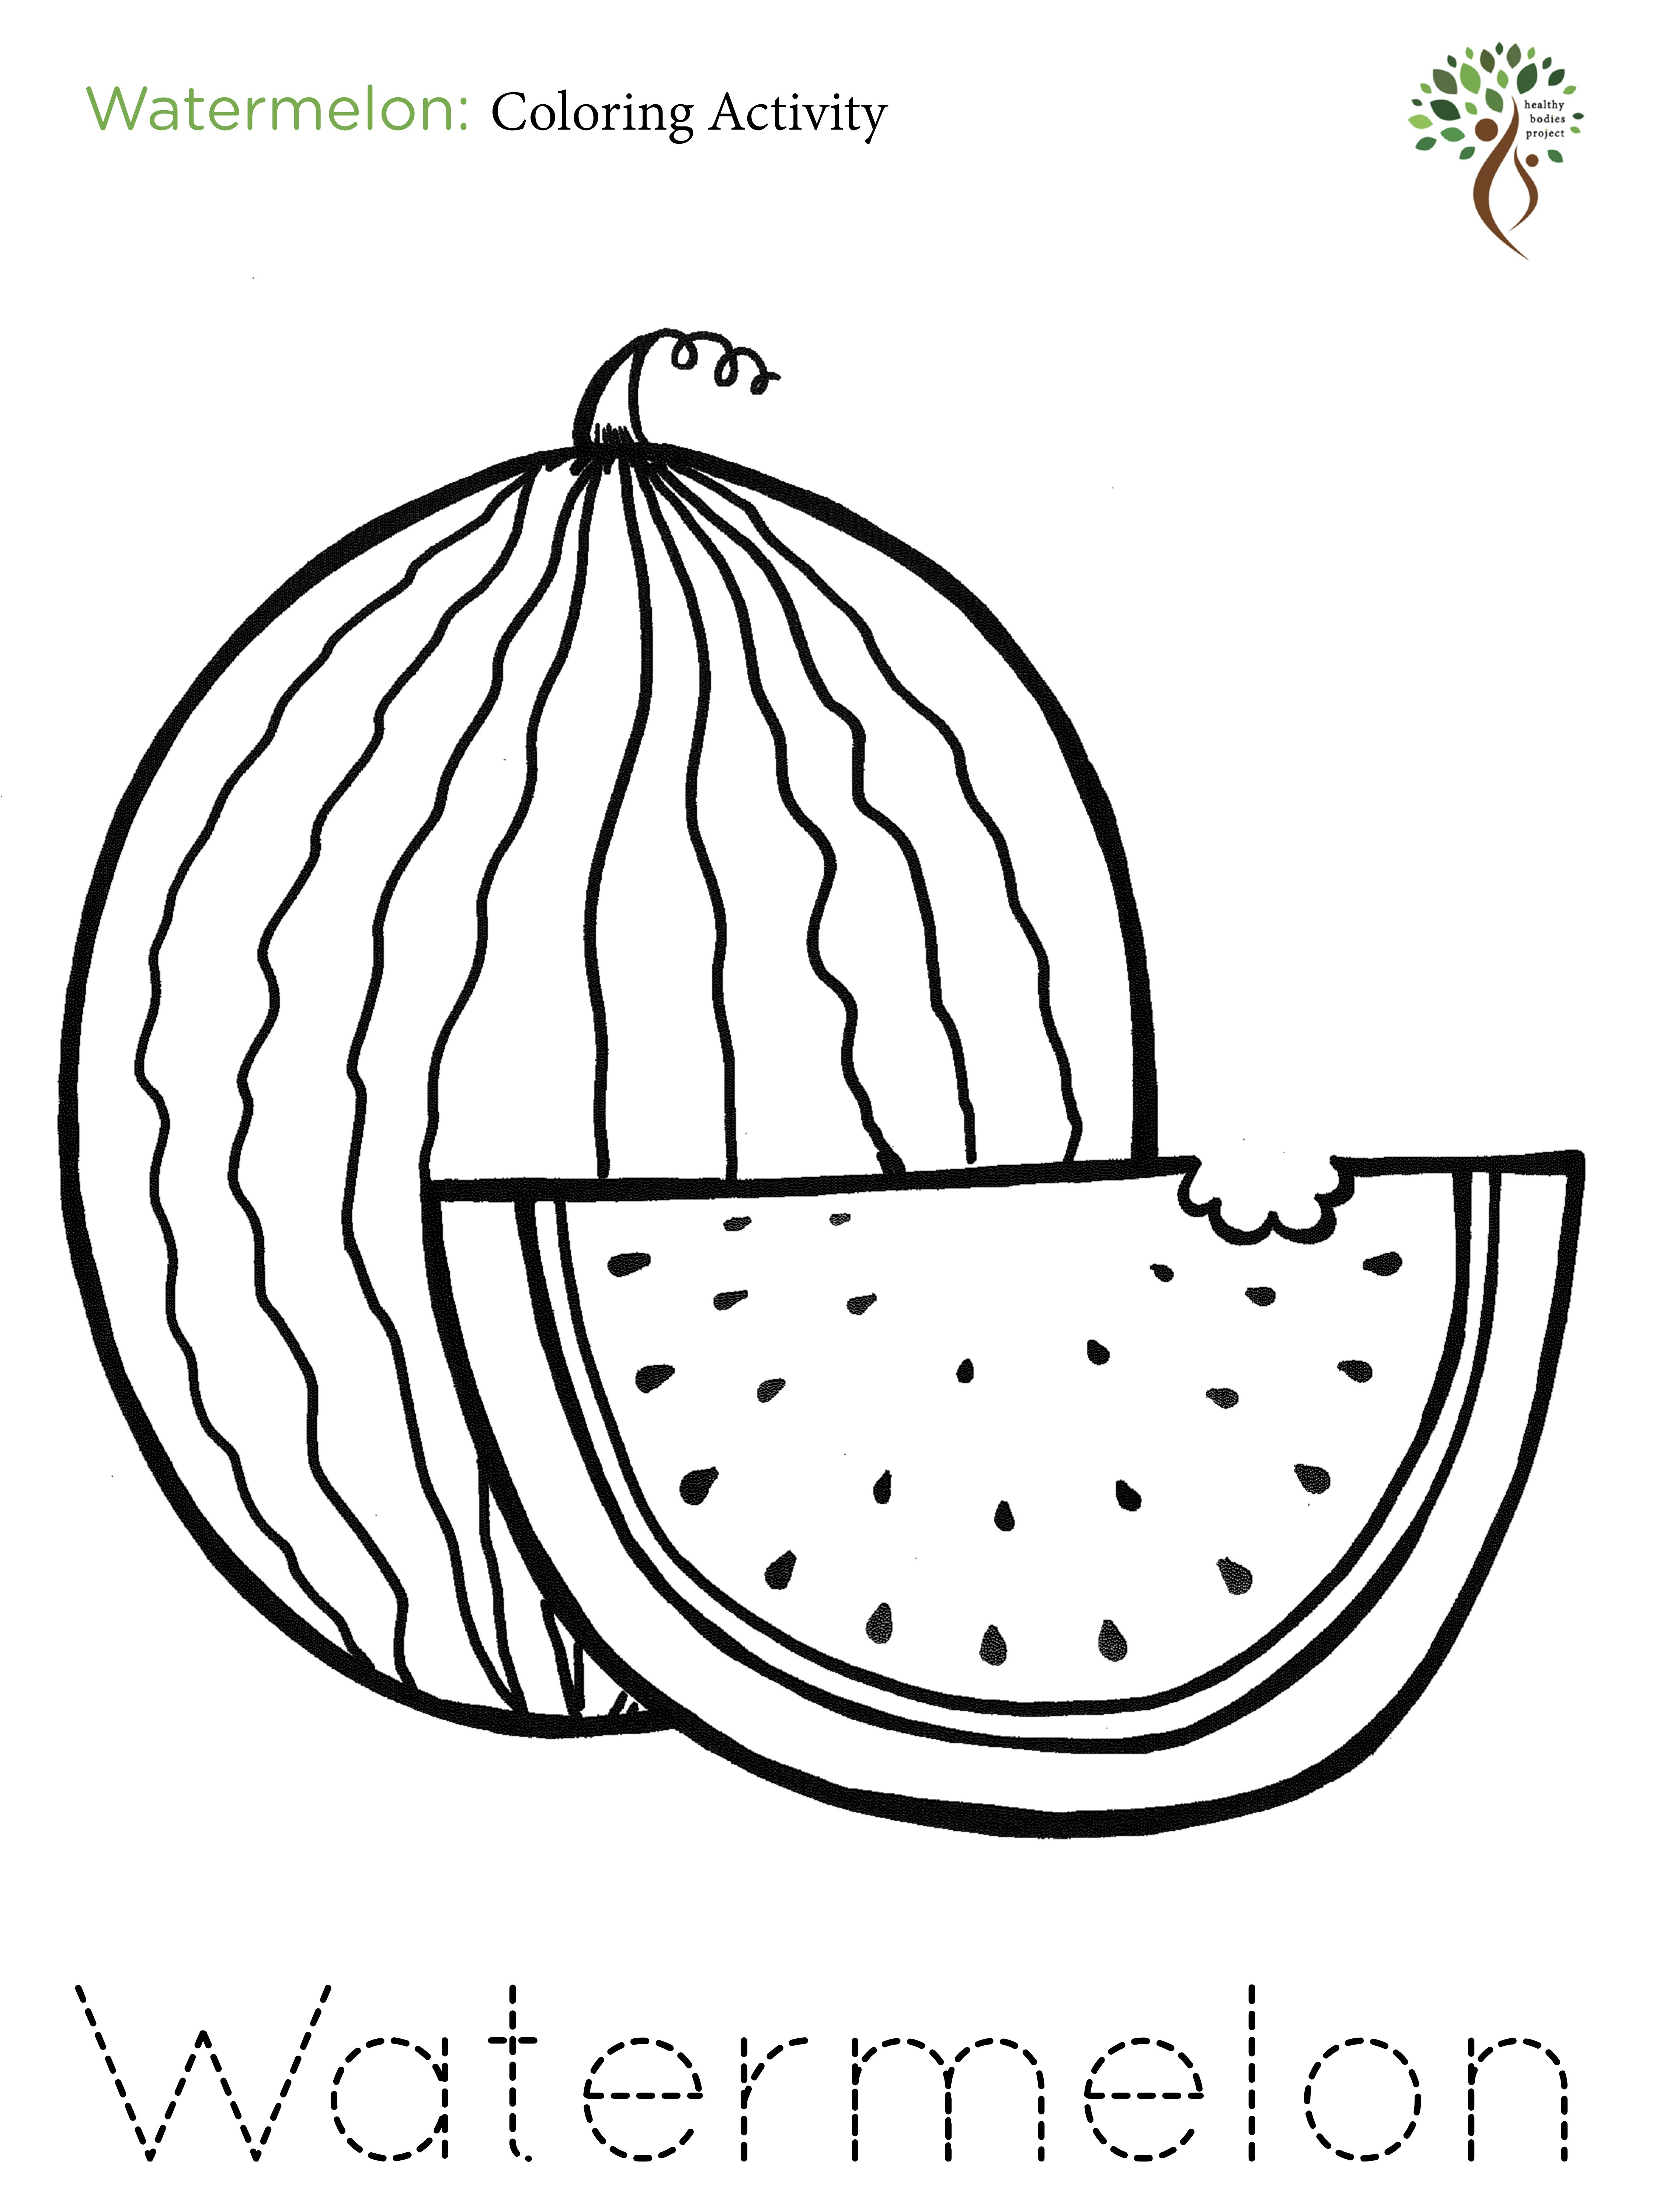 Watermelon Coloring Pages
 A Z Coloring Activities